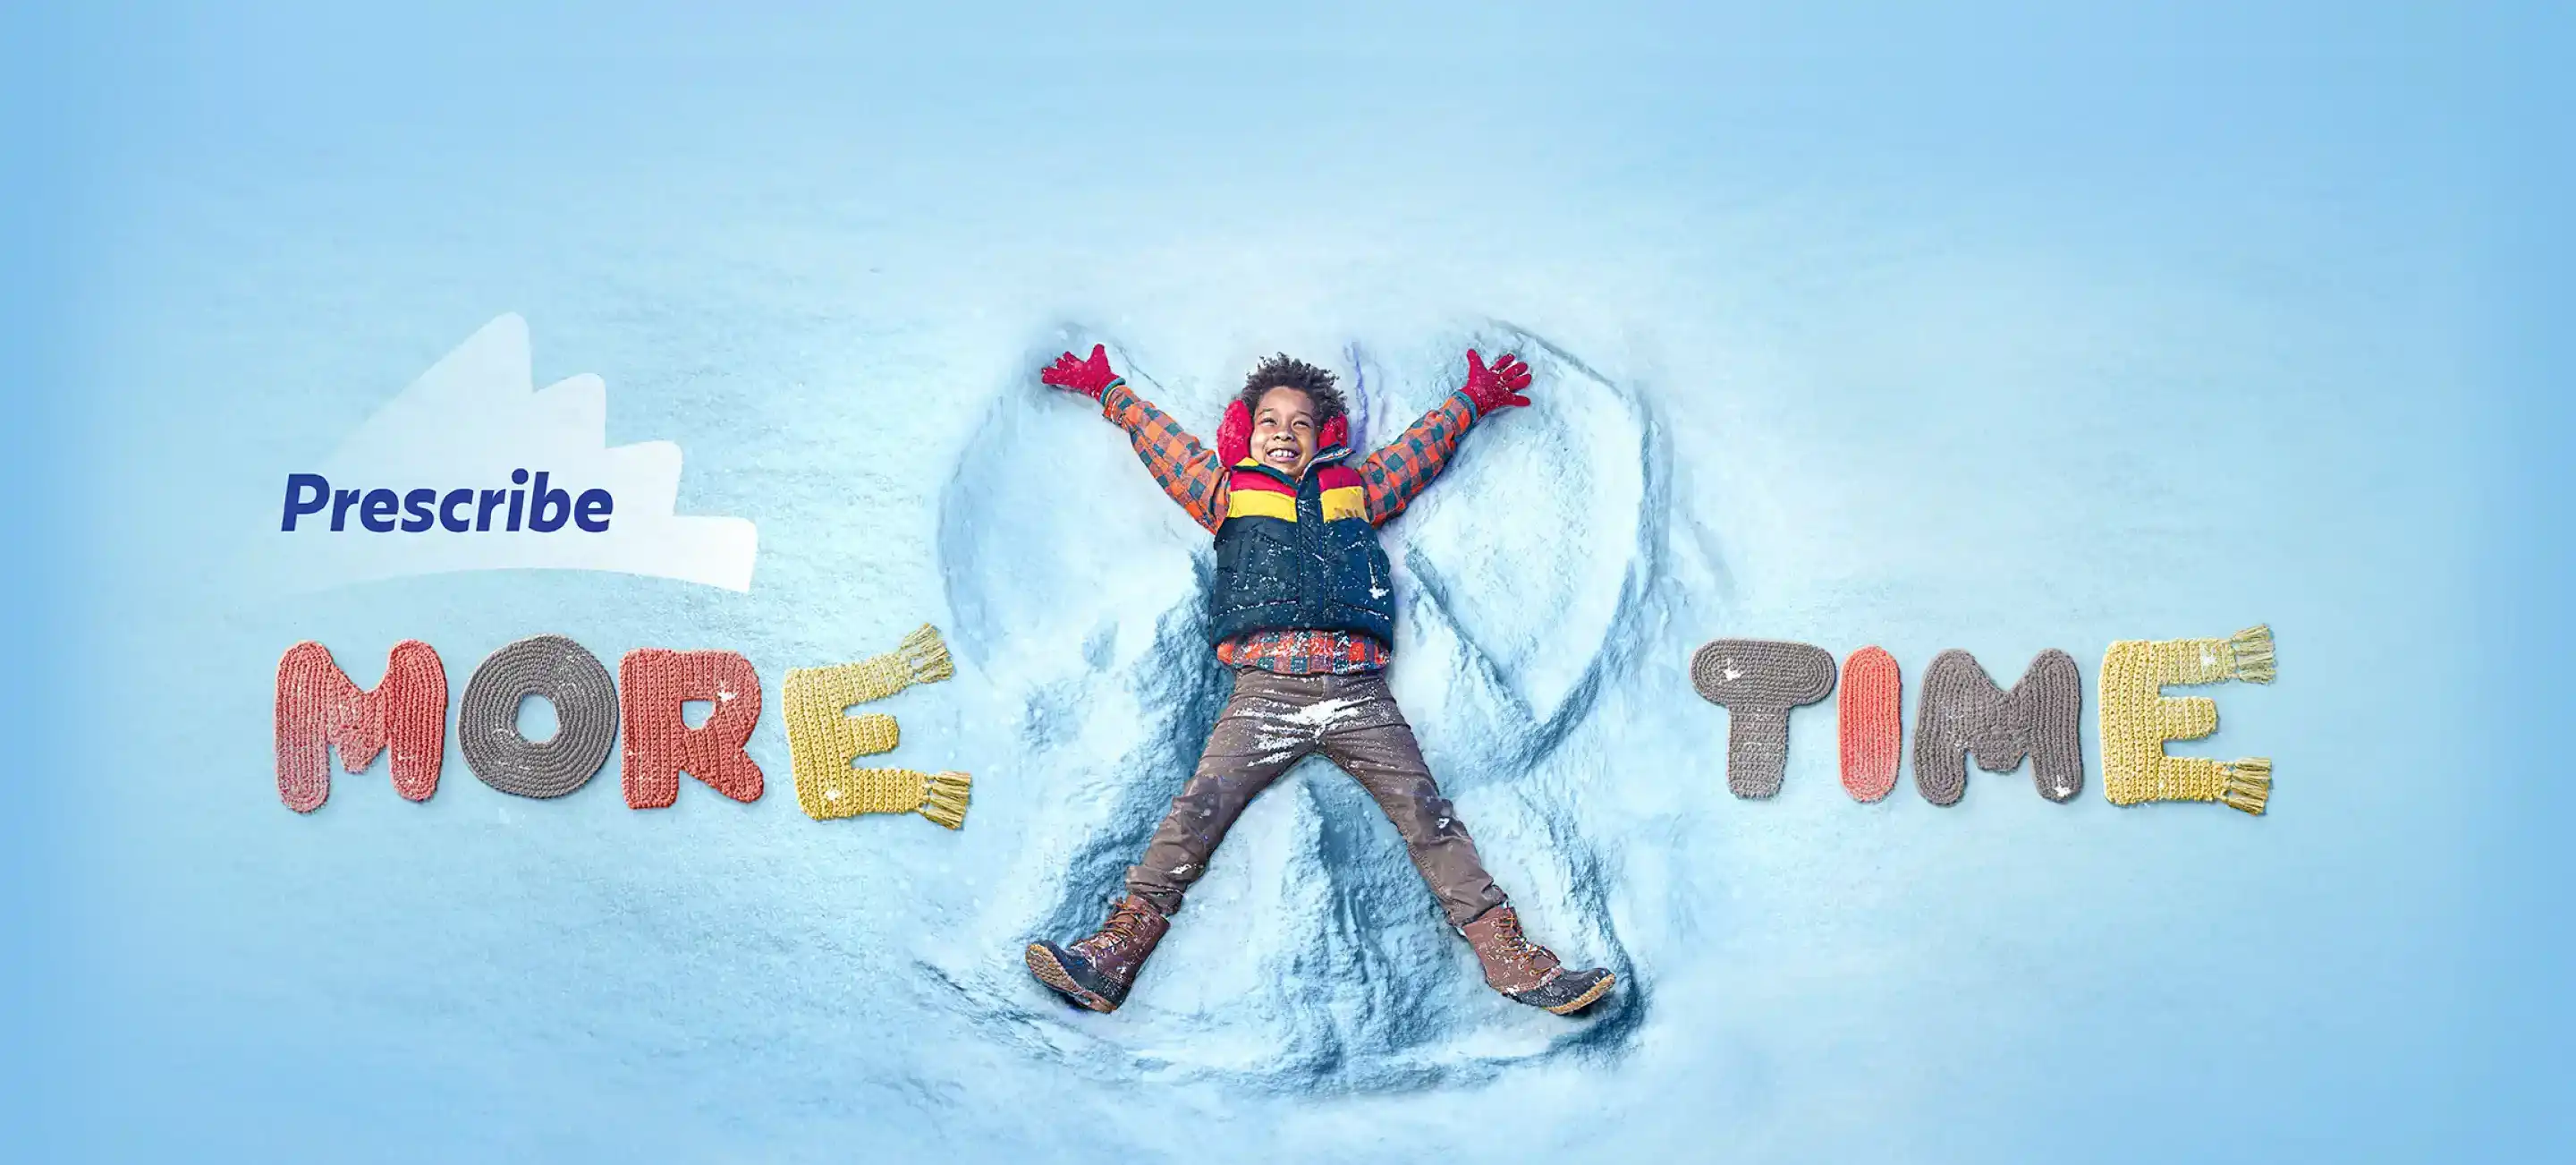 A smiling child making a snow angel. The words &quot;Prescribe More Time&quot; are shown to the side.